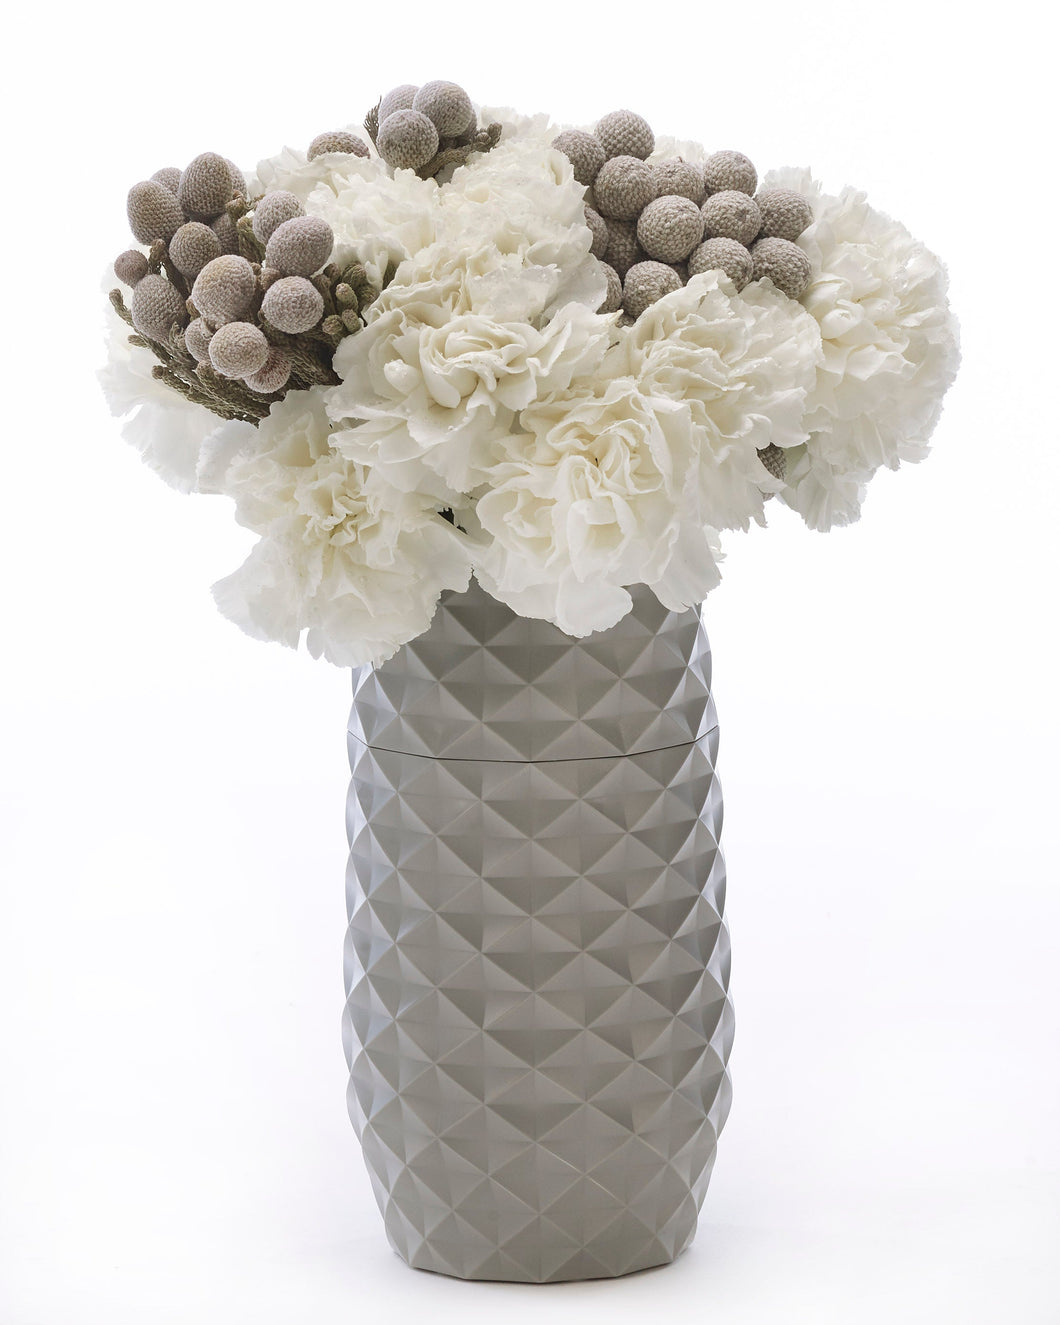 The Amaranth Vase in Cool Grey - 7.5